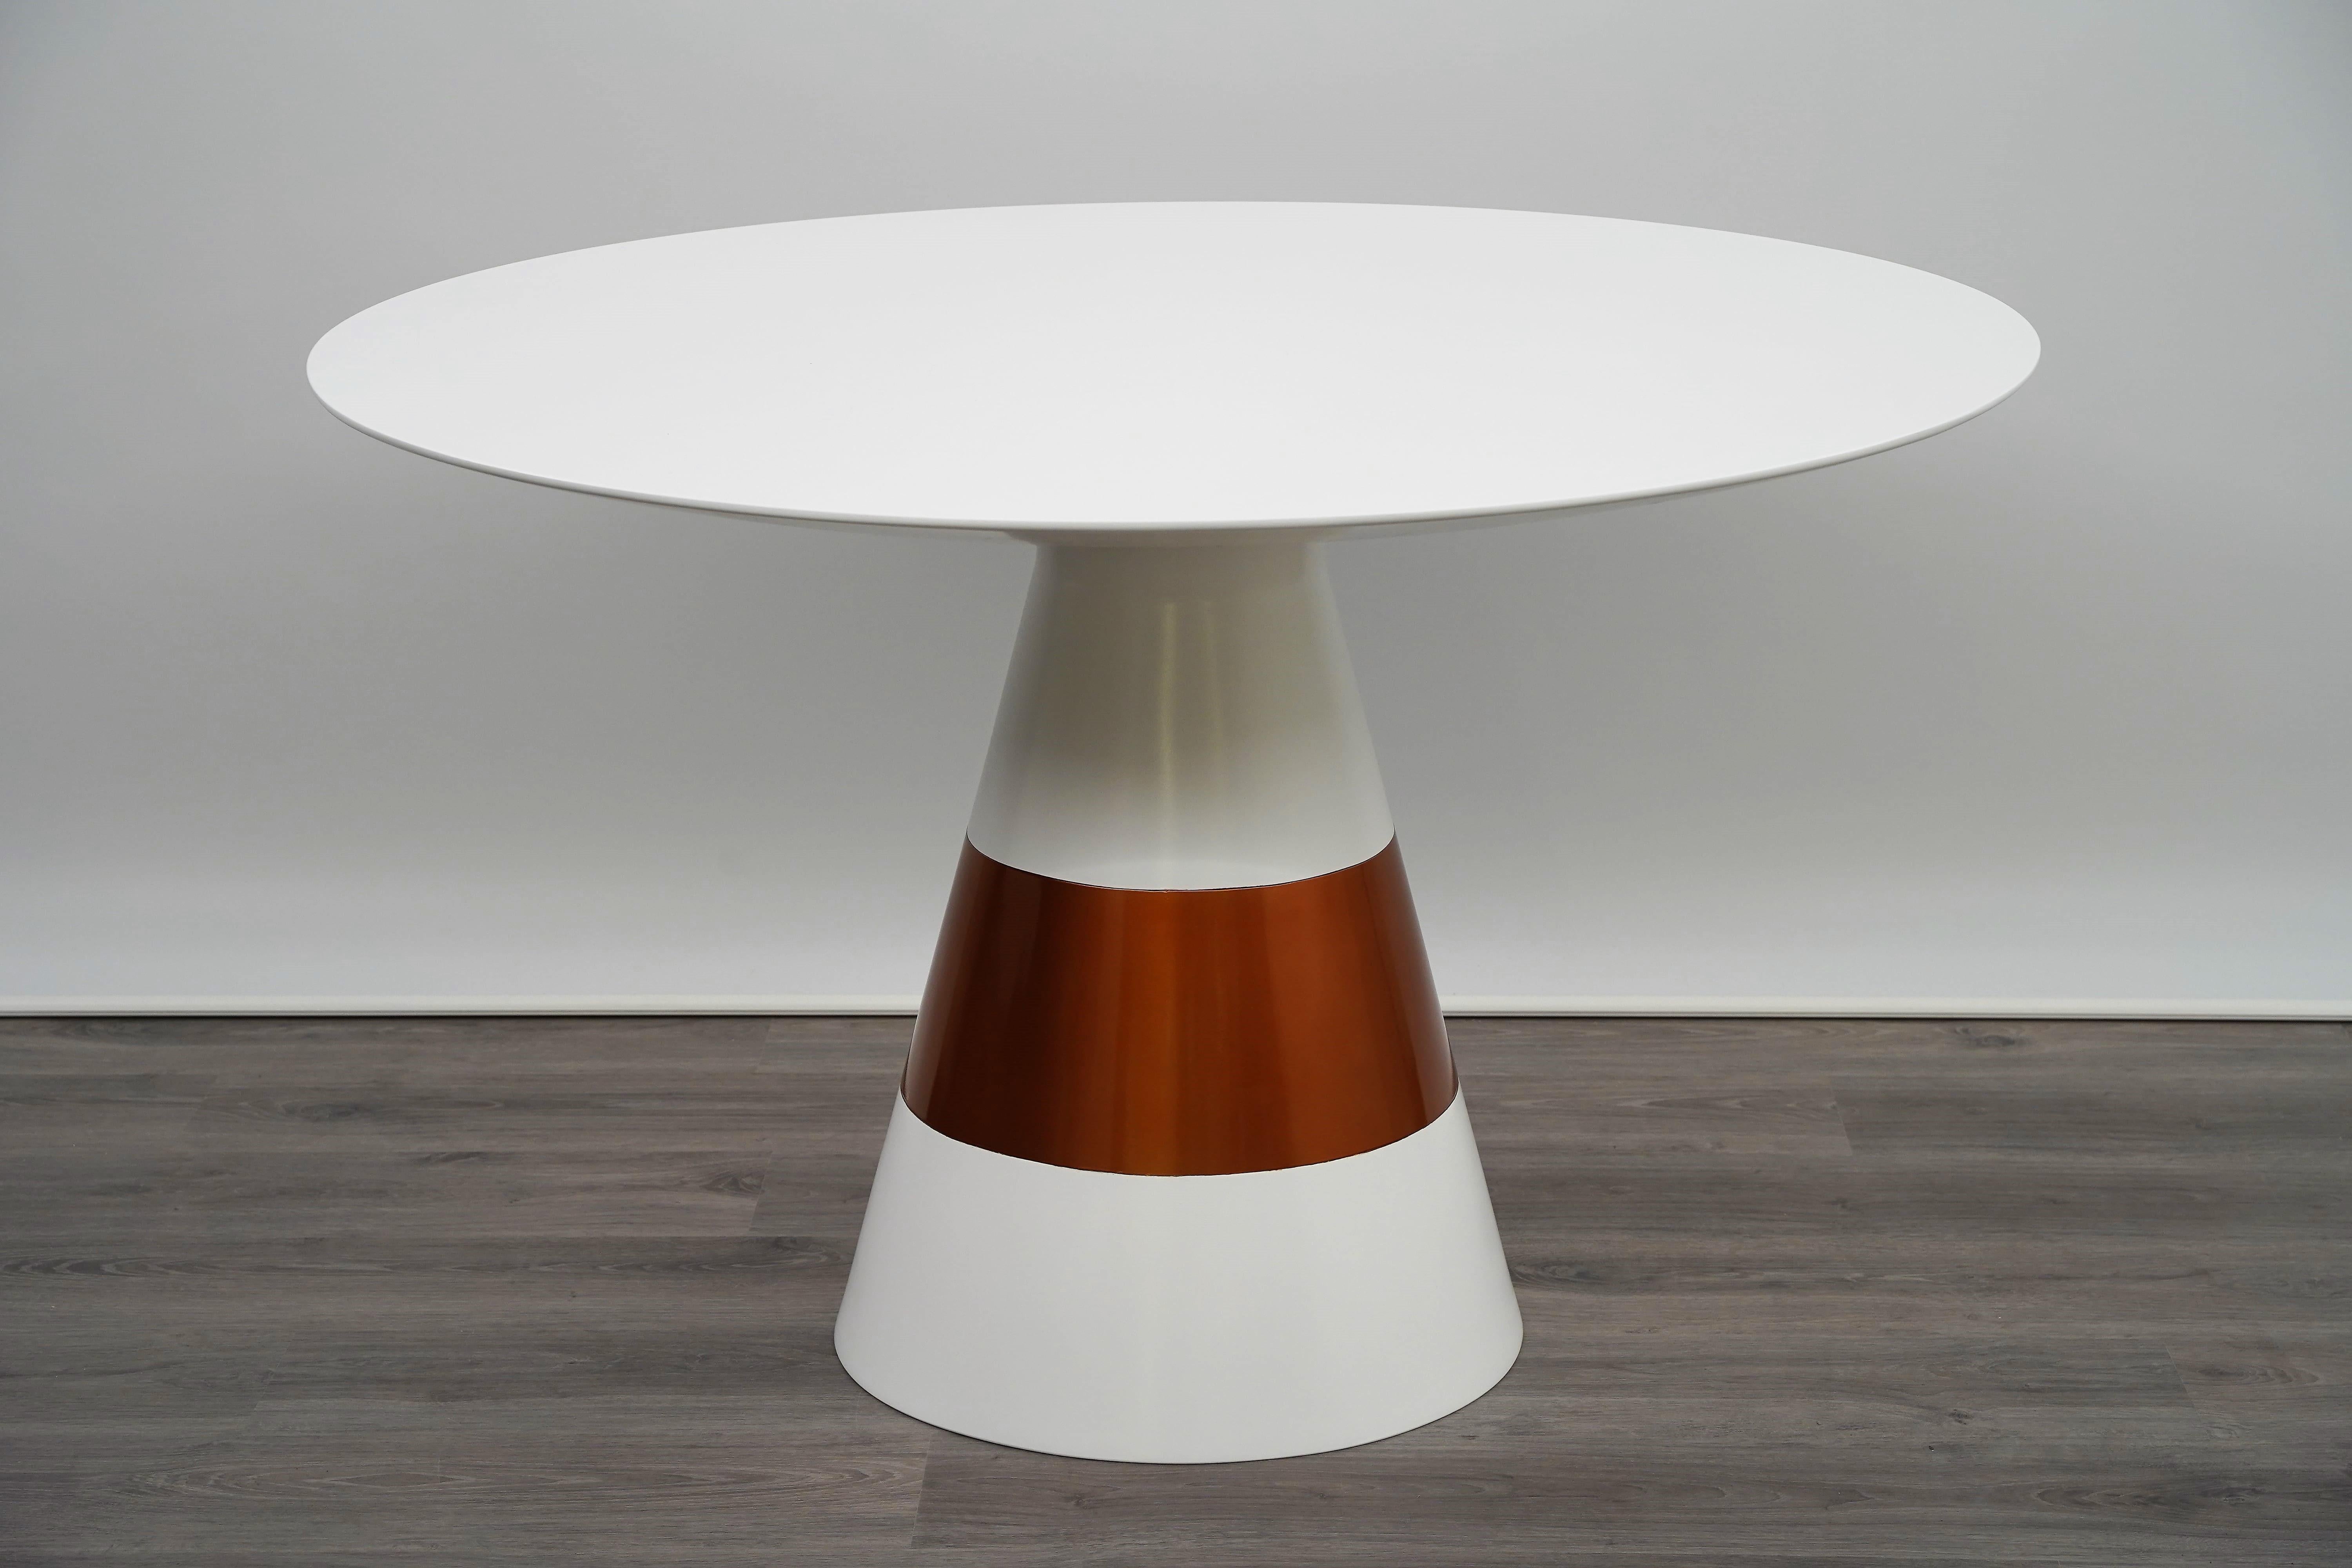 Structure: Resin reinforced with fiberglass finished in white lacquer with bronze detailing on the base.
Properties: The reinforced resin provide a durable, scratch-resistant surface.
The table is also available in outdoor version without the